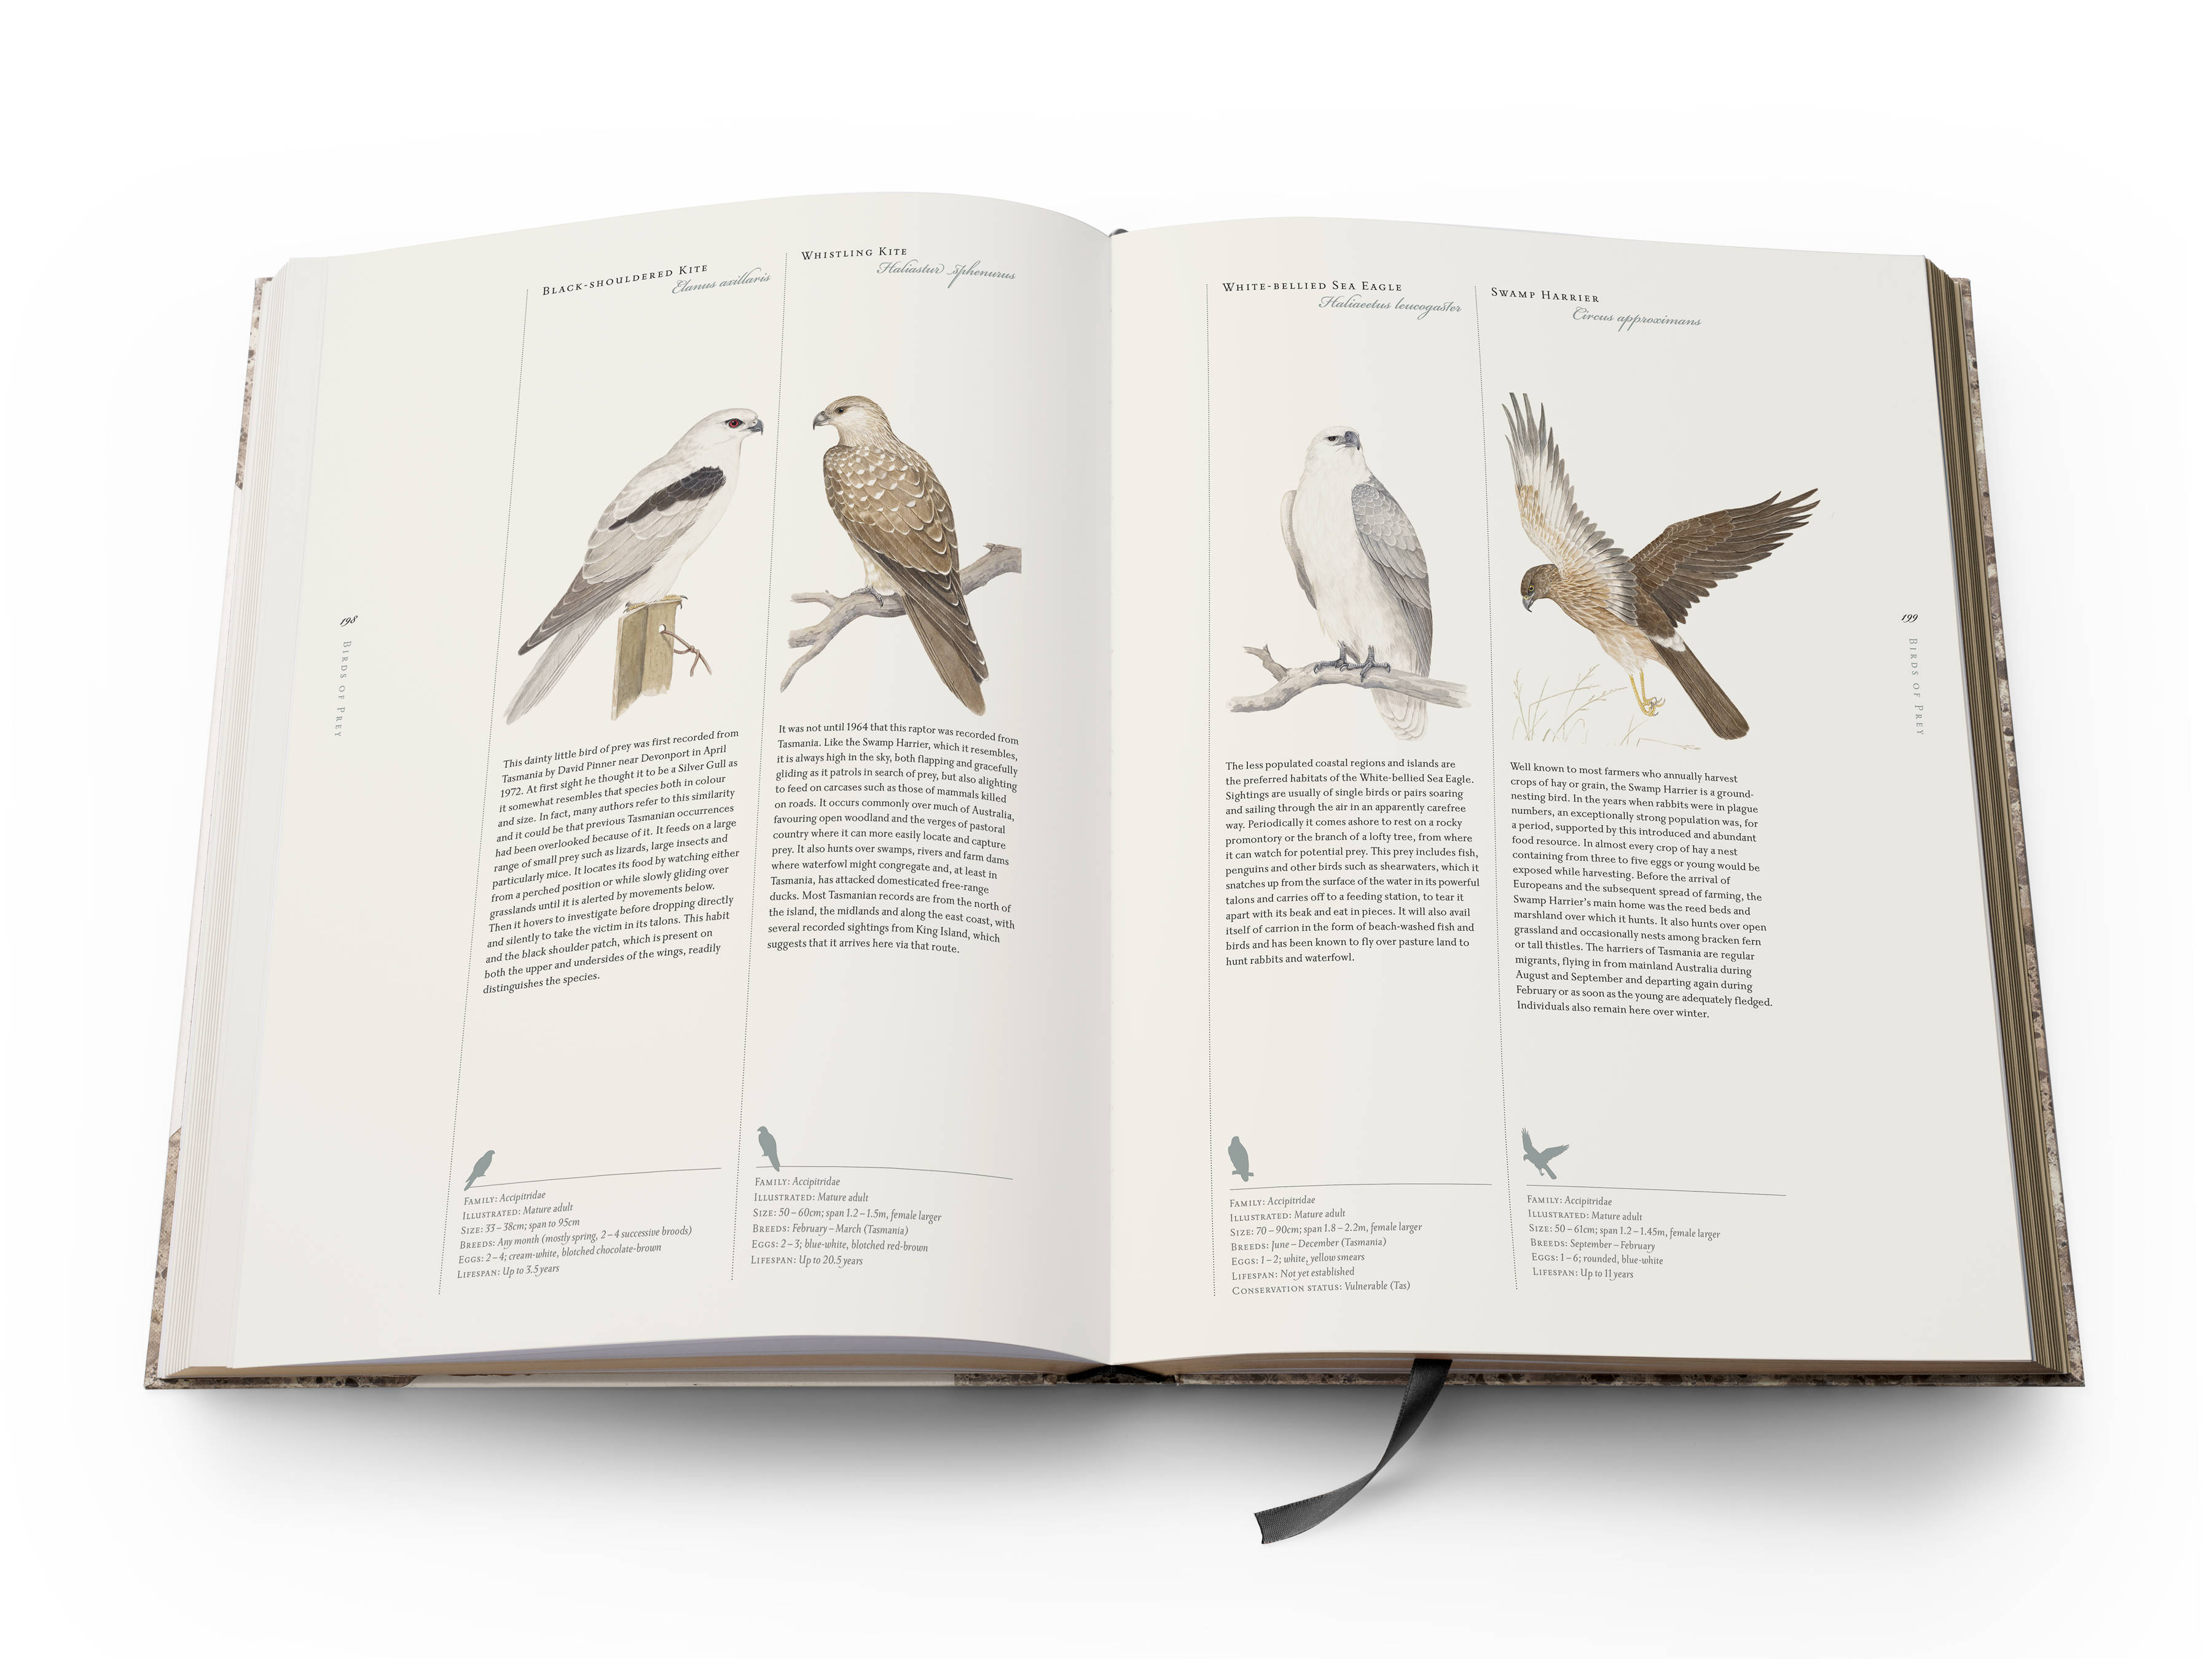 A double page spread from the book with 4 half-page colour plates pictured from left to right: Black-shouldered Kite ‘Elanus axillar’, Whistling Kite ‘Haliastur sphenurus’, White-bellied Sea Eagle ‘Haliaeetus leucogaster’ and Swamp Harrier ‘Circus approximans’.